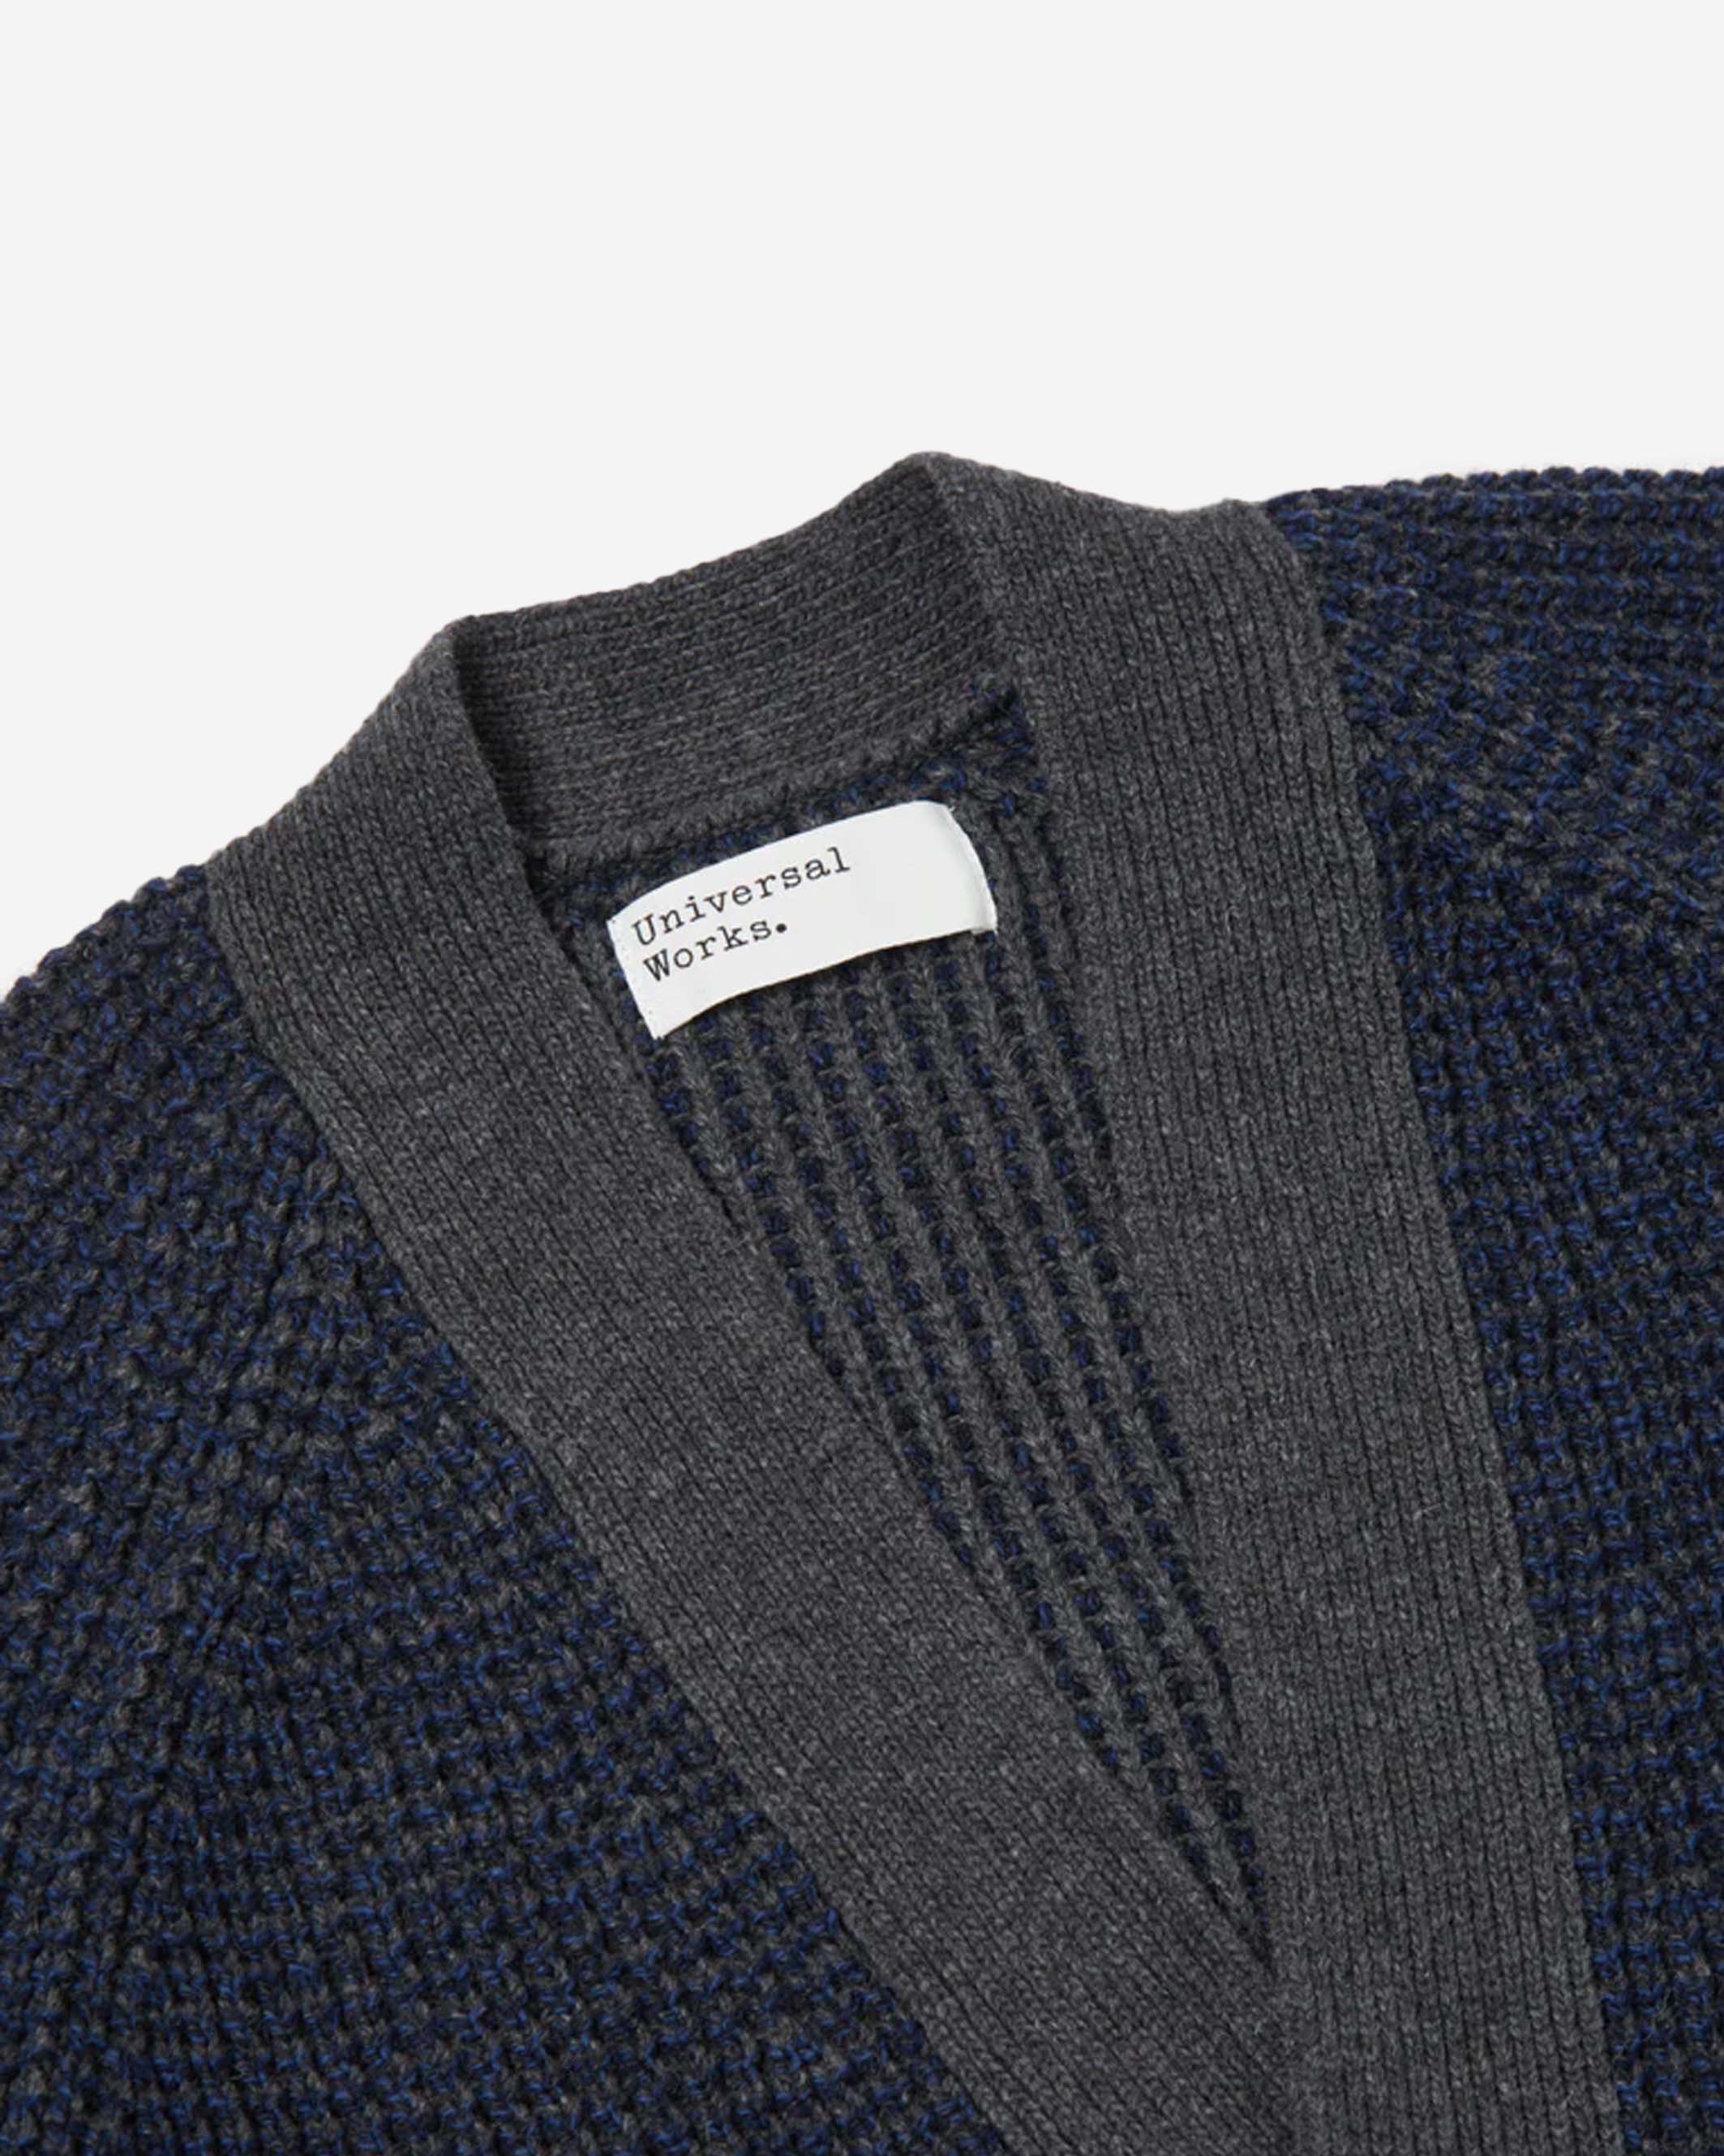 A soft and warm yarn for a high-quality look and feel, expertly made in Italy. • V-neck. • Loose comfortable fit. • Four button front. • Raglan sleeves. • Two large patch pockets. • Fabric Content: 80% Wool, 20% Polyamide. • Washcare: Cool hand wash. Do not bleach. Do not tumble dry. Dry Flat. Warm iron. Dry Cleanable. Wash like colours together.